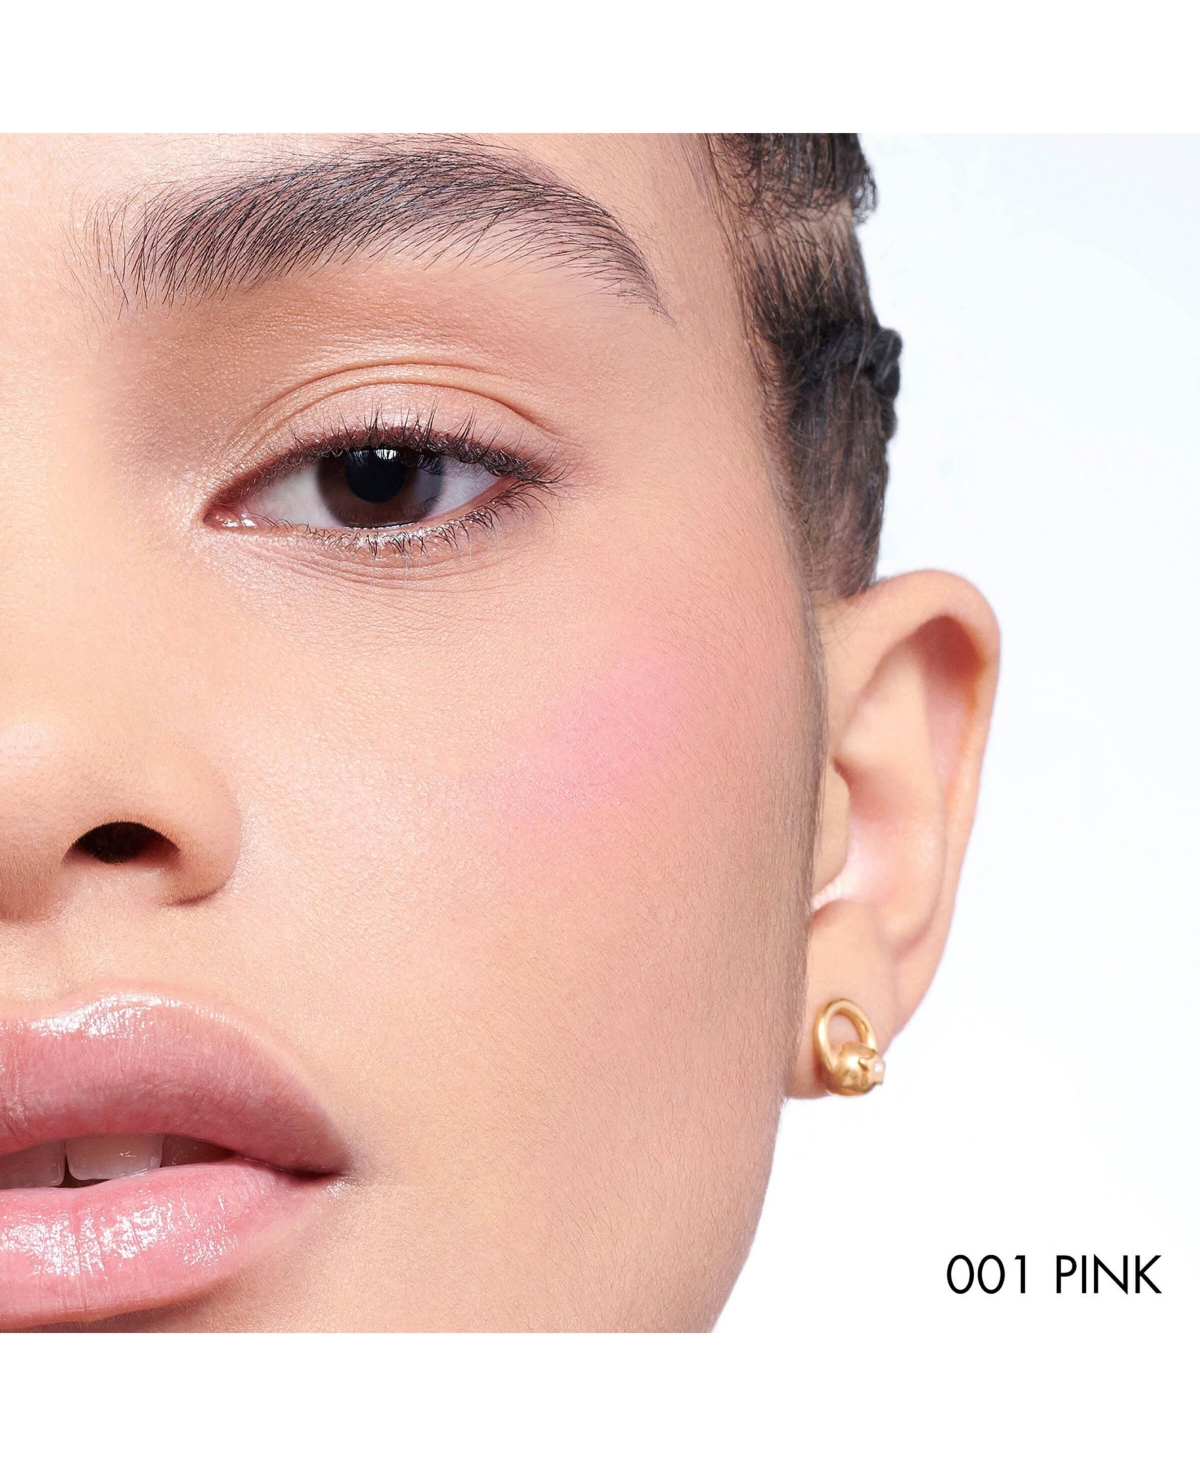 Shop Dior Backstage Rosy Glow Blush In Berry (a Deep Plum)